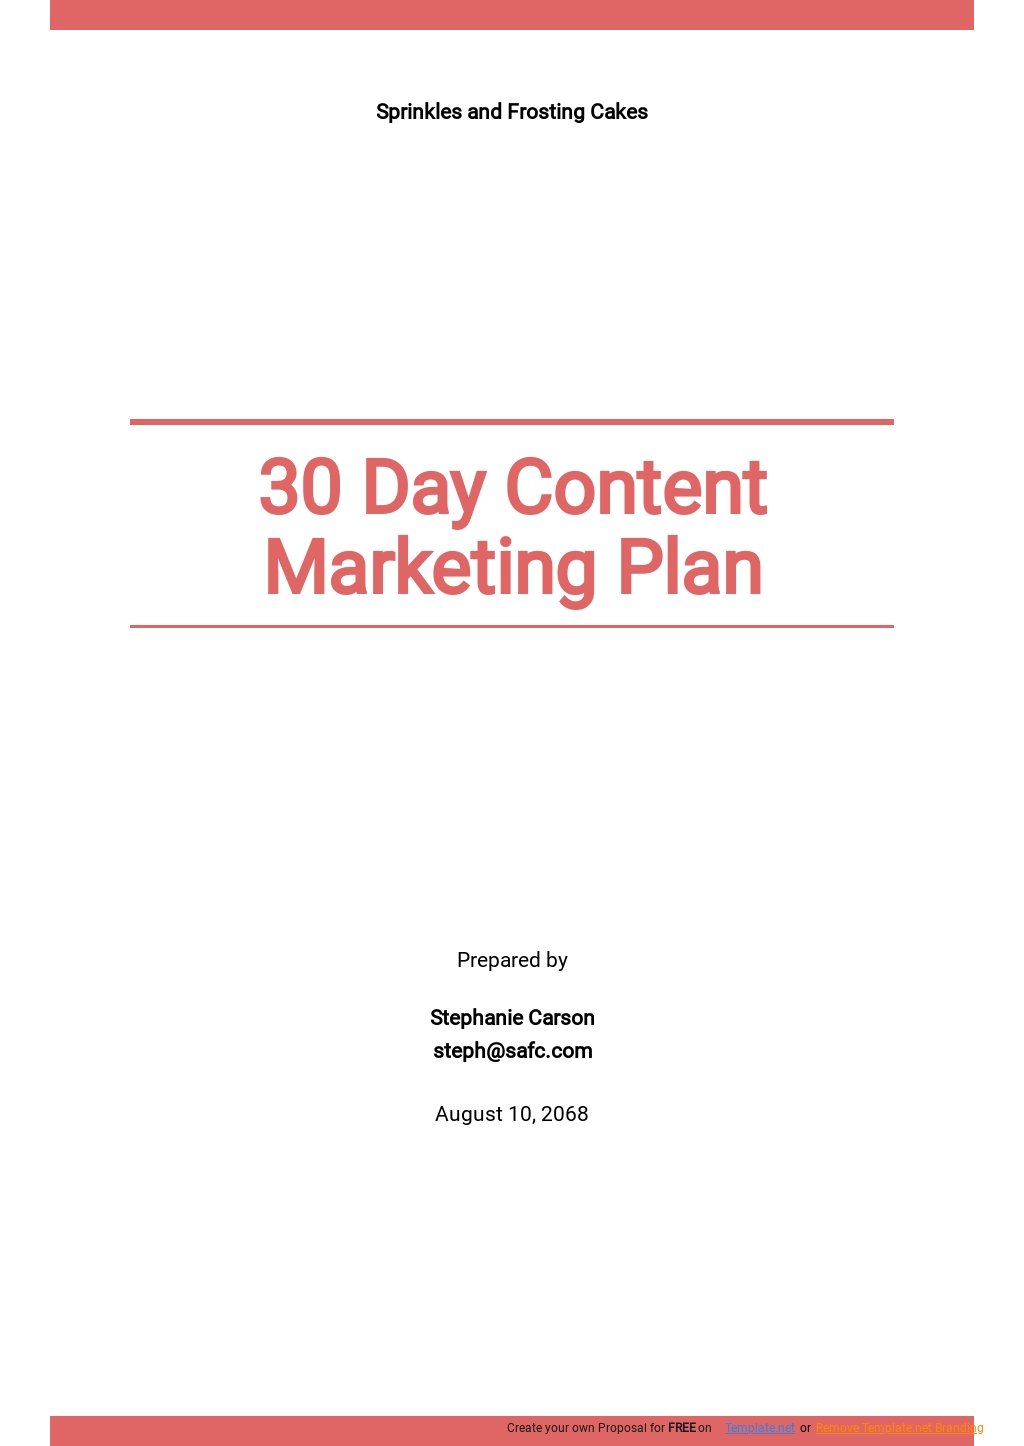 30 Day Content Marketing Plan Template.jpe